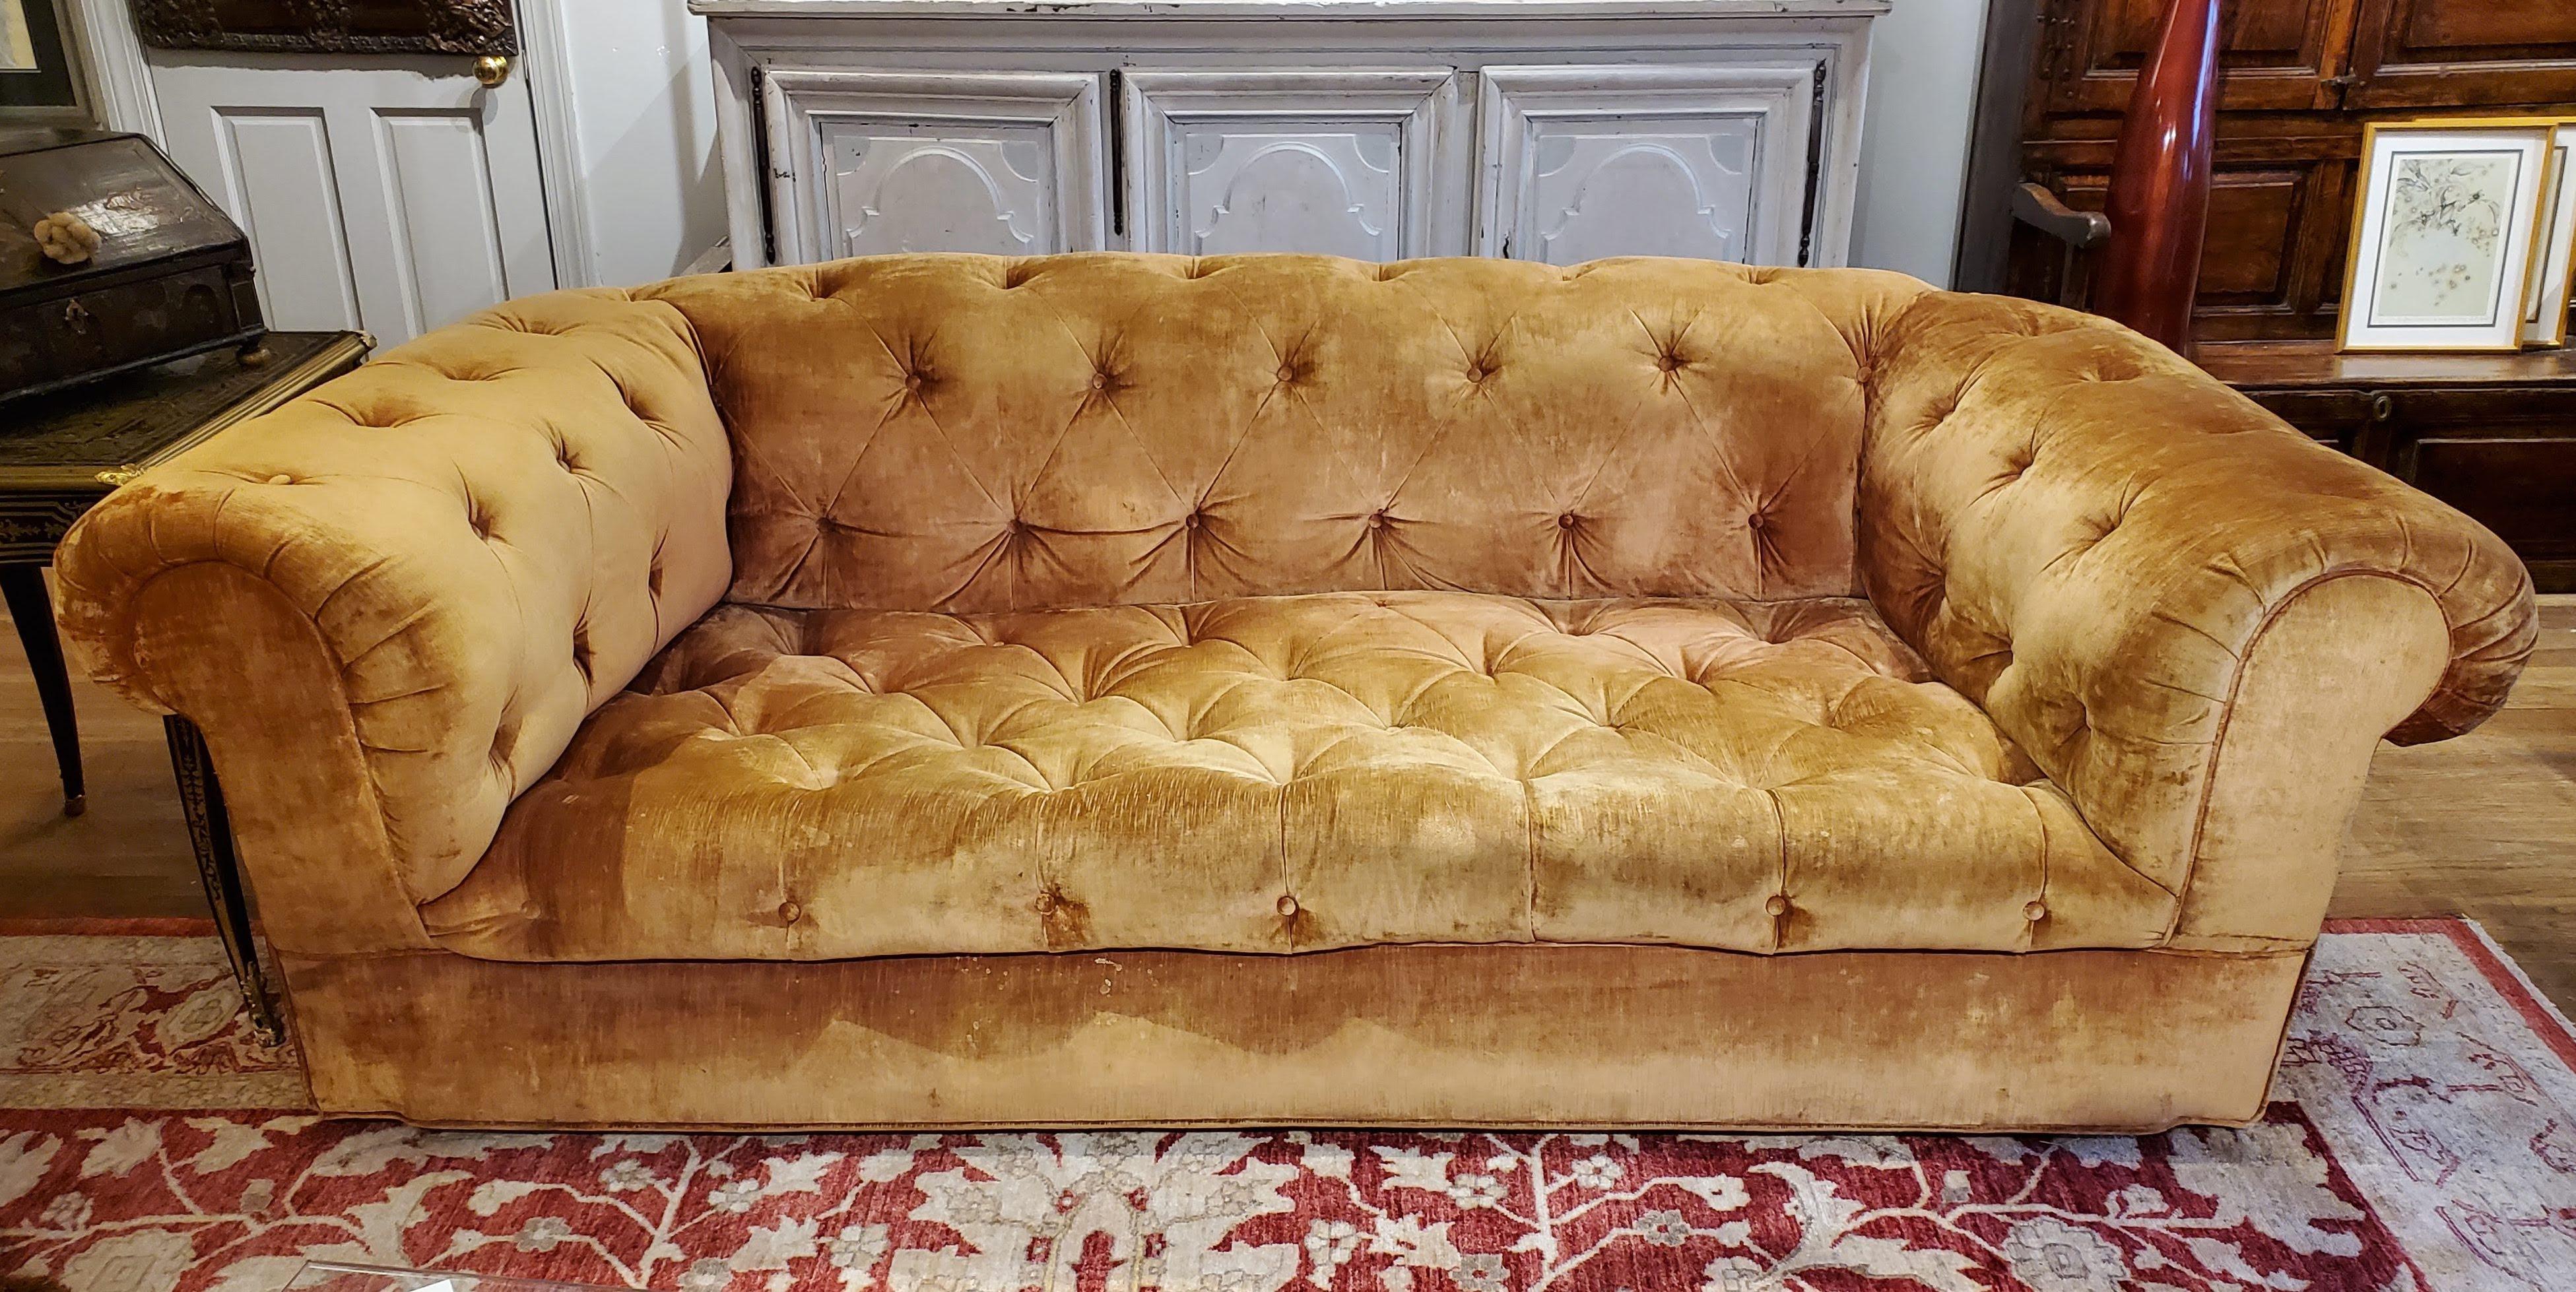 This beautiful 19th century English yellow-gold velvet Chesterfield screams 